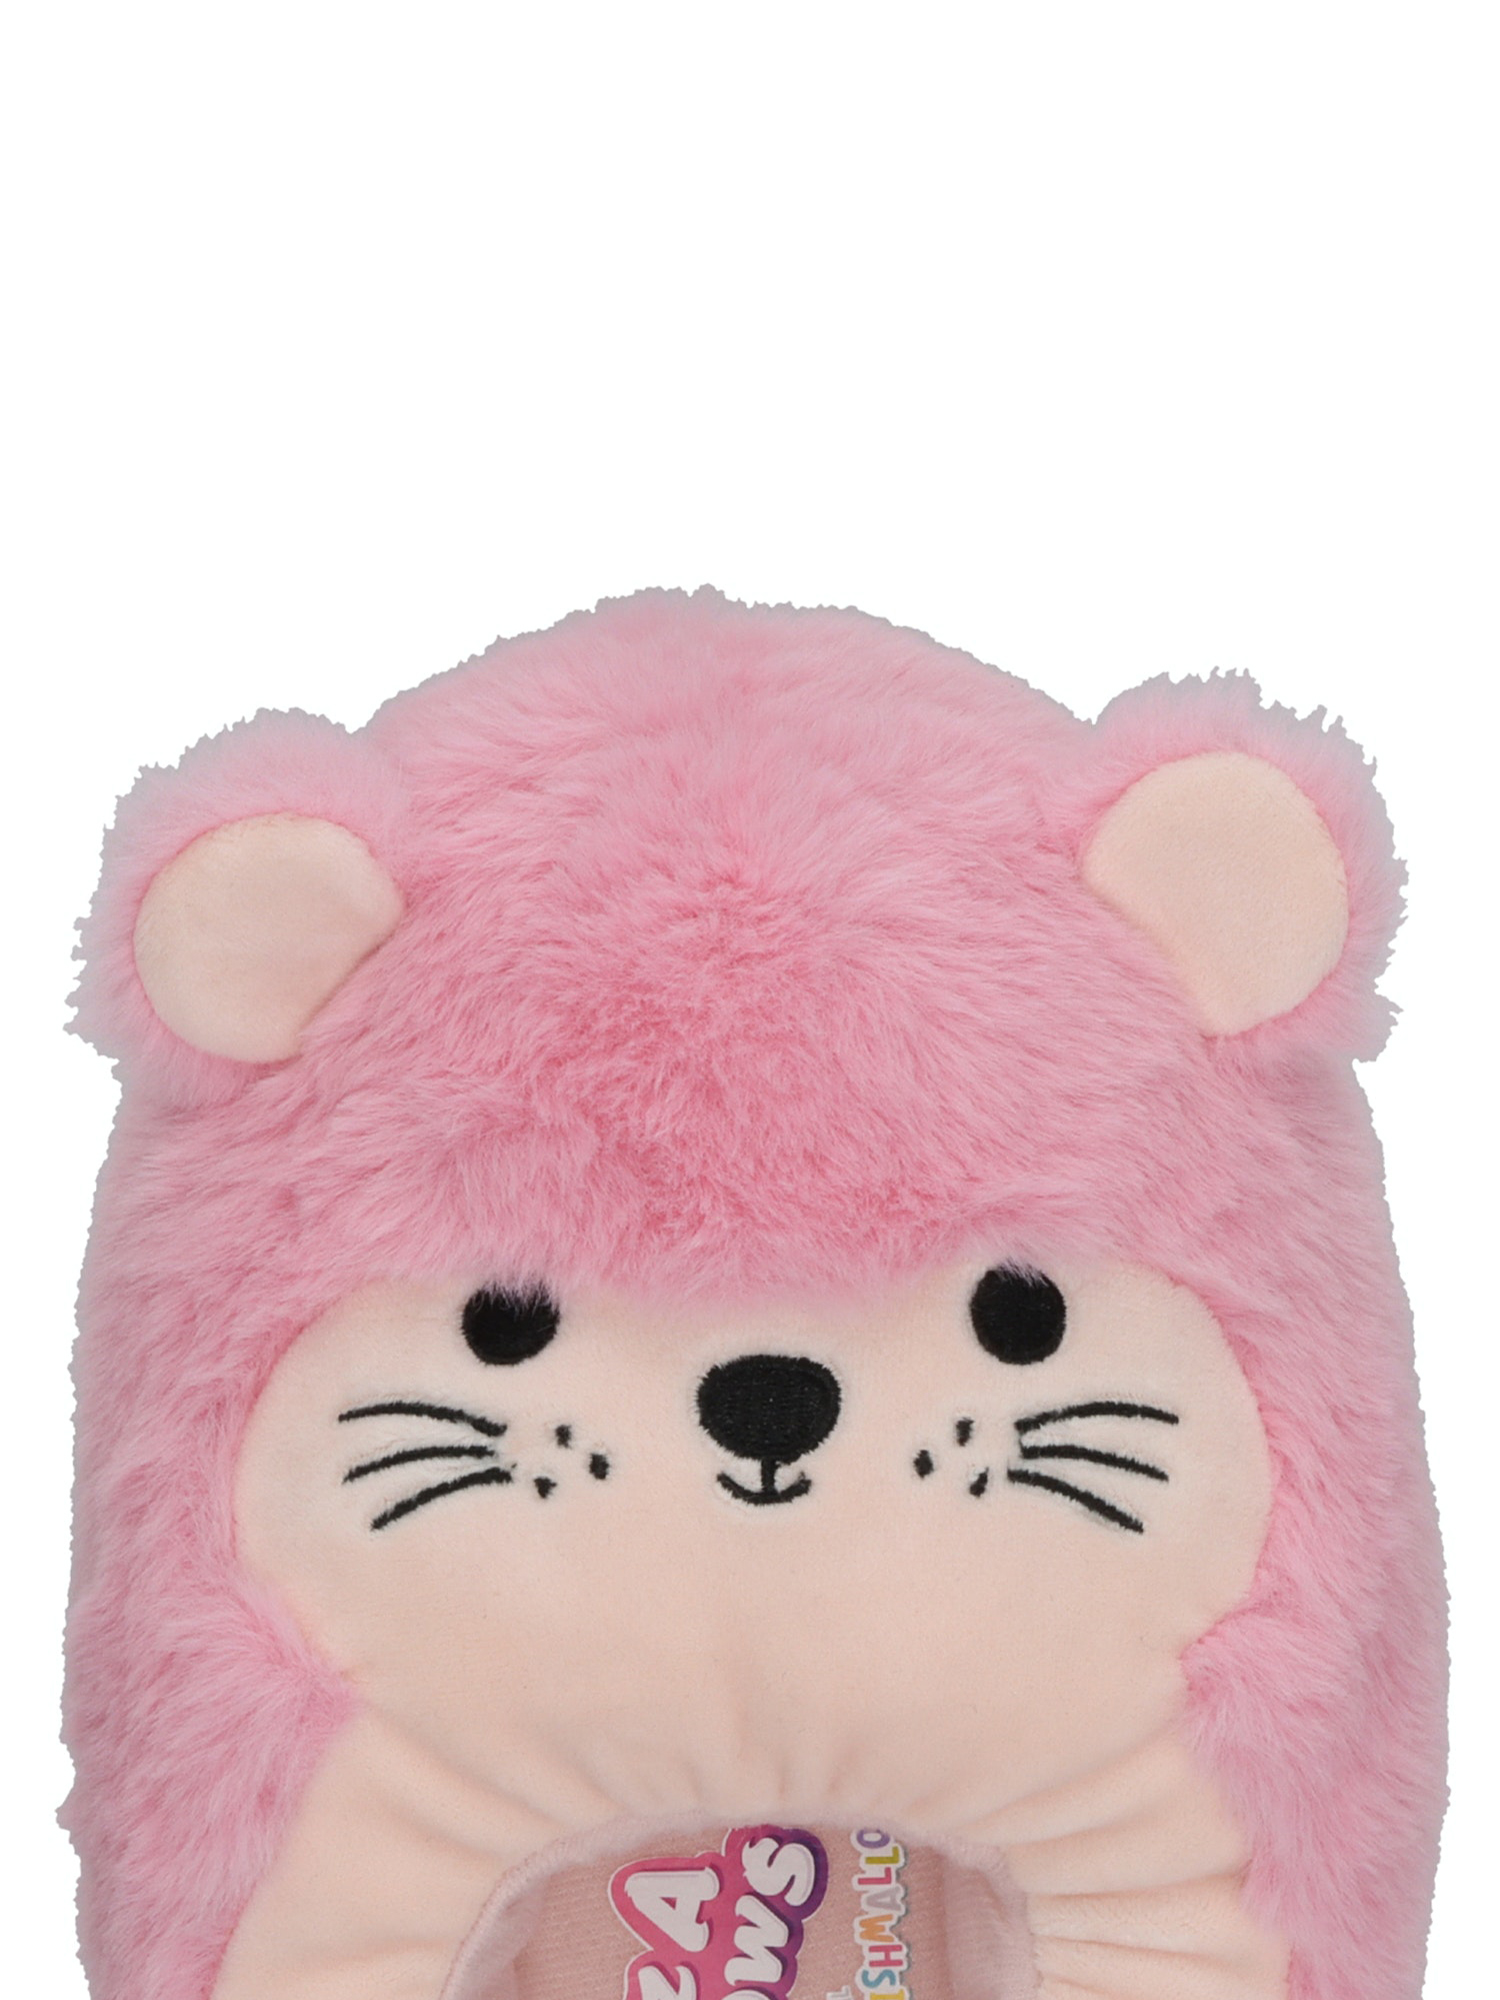 Squishmallows Toddler & Kids Anu the Hamster Slipper - image 3 of 6